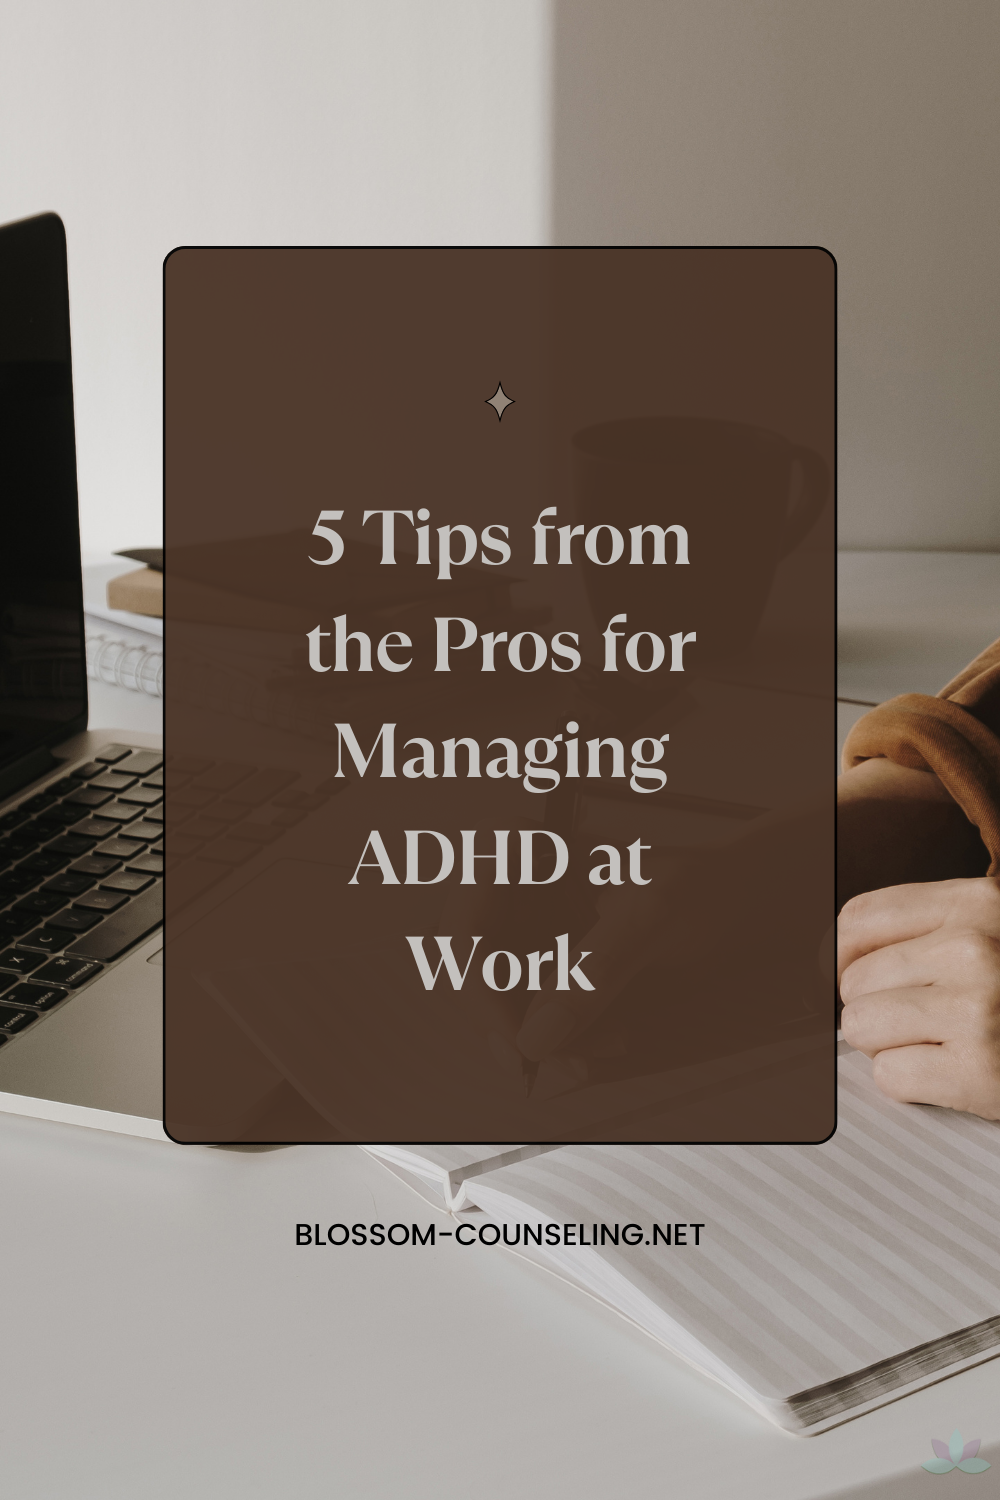 5 Tips from the Pros for Managing ADHD at Work